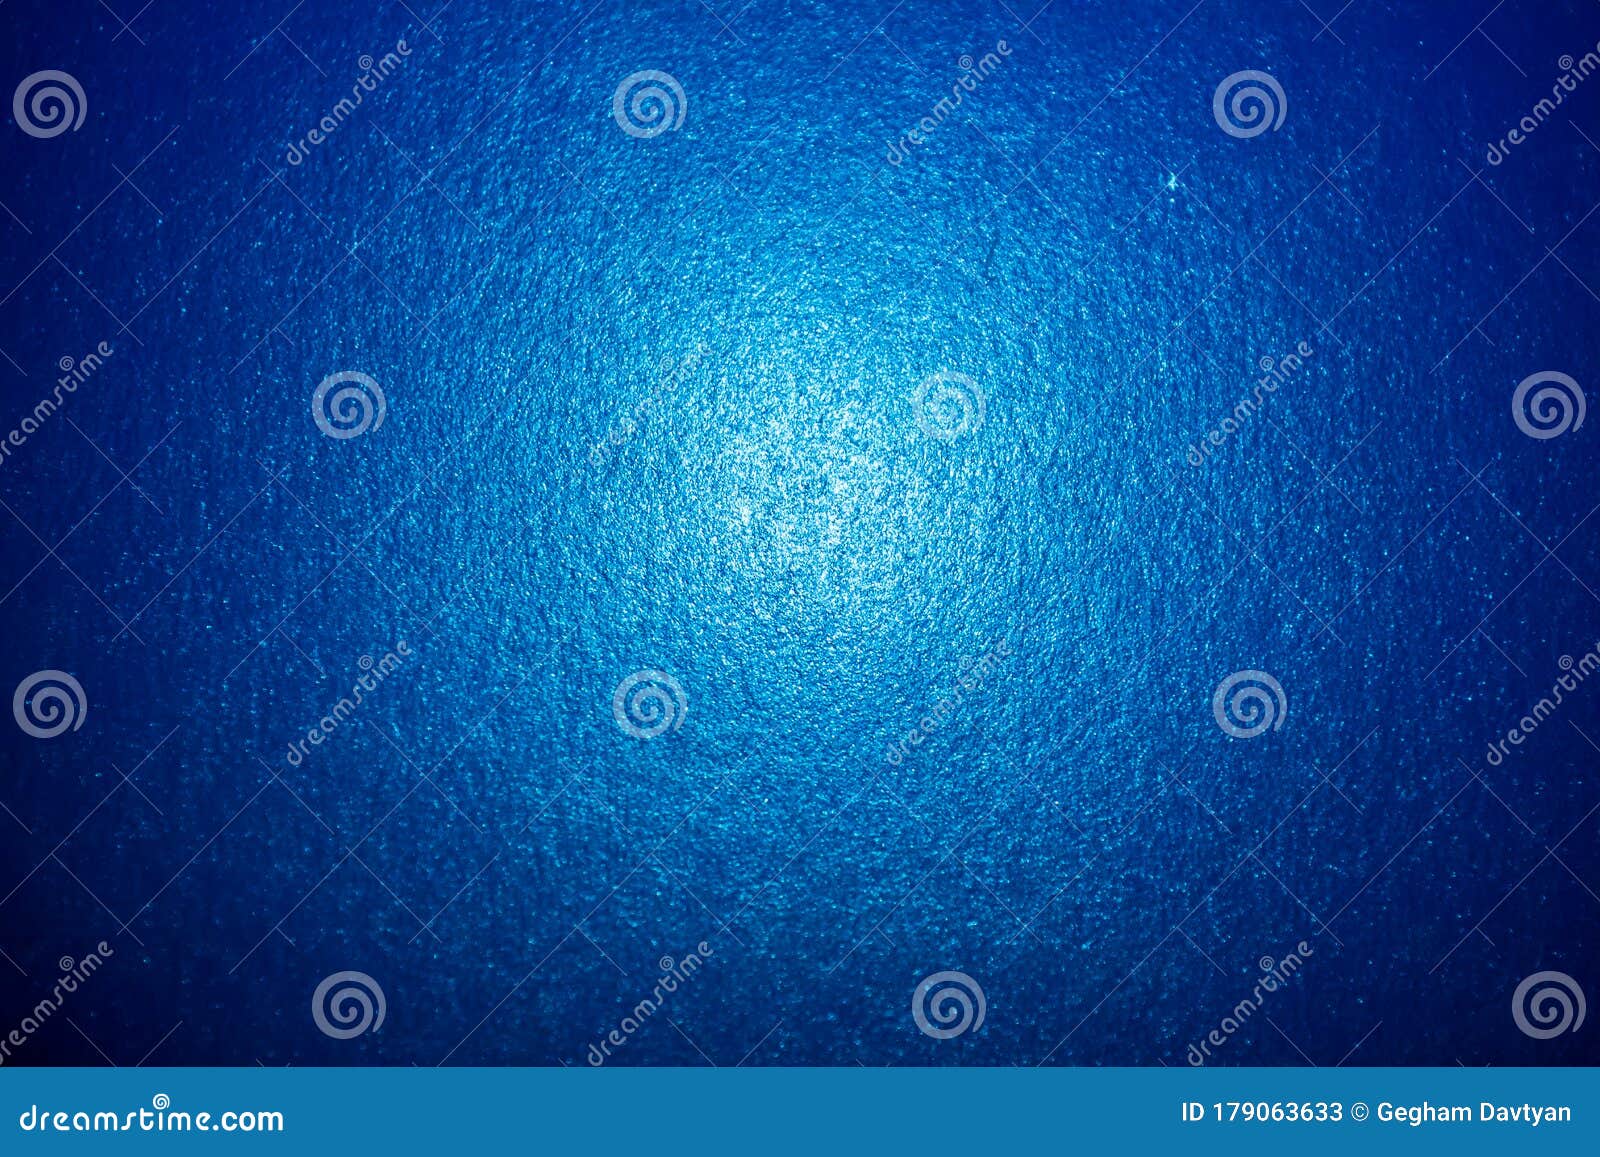 Dark Blue Background, Blue Abstract Background, Blue Wallpaper, Hd Abstract Blue  Wallpaper Stock Illustration - Illustration of geometric, bright: 179063633